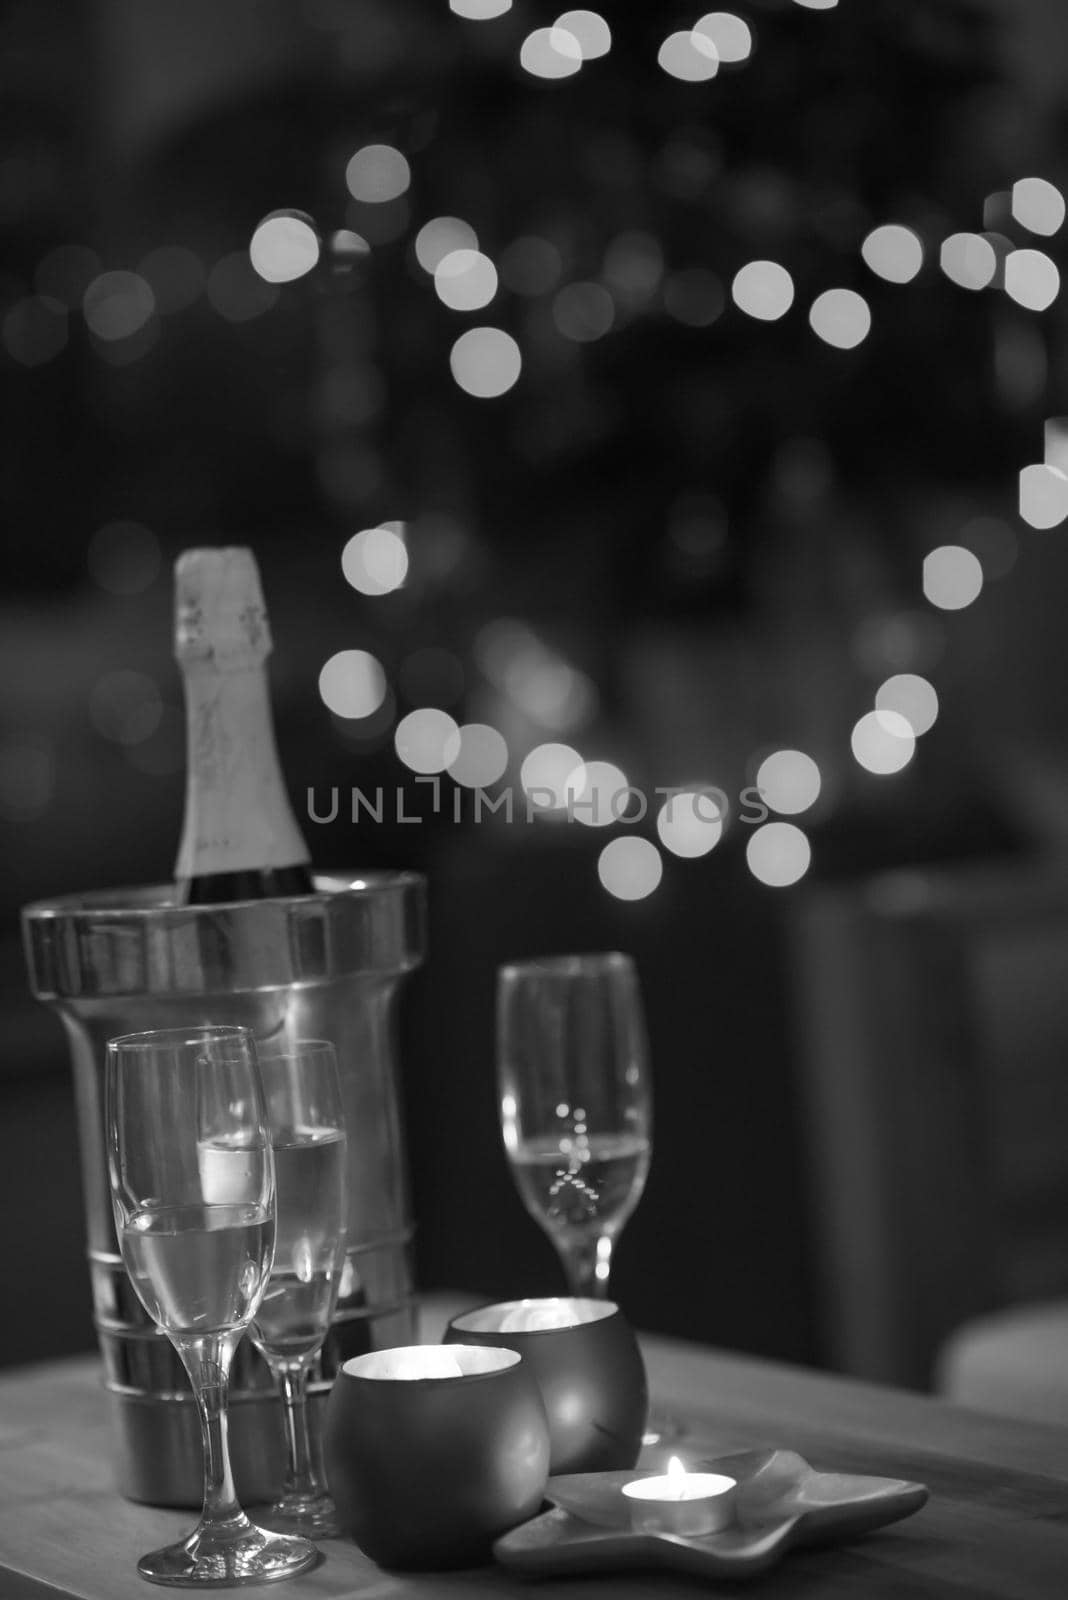 champagne and crystal glasses on a wooden table with candles and holiday lights in the background